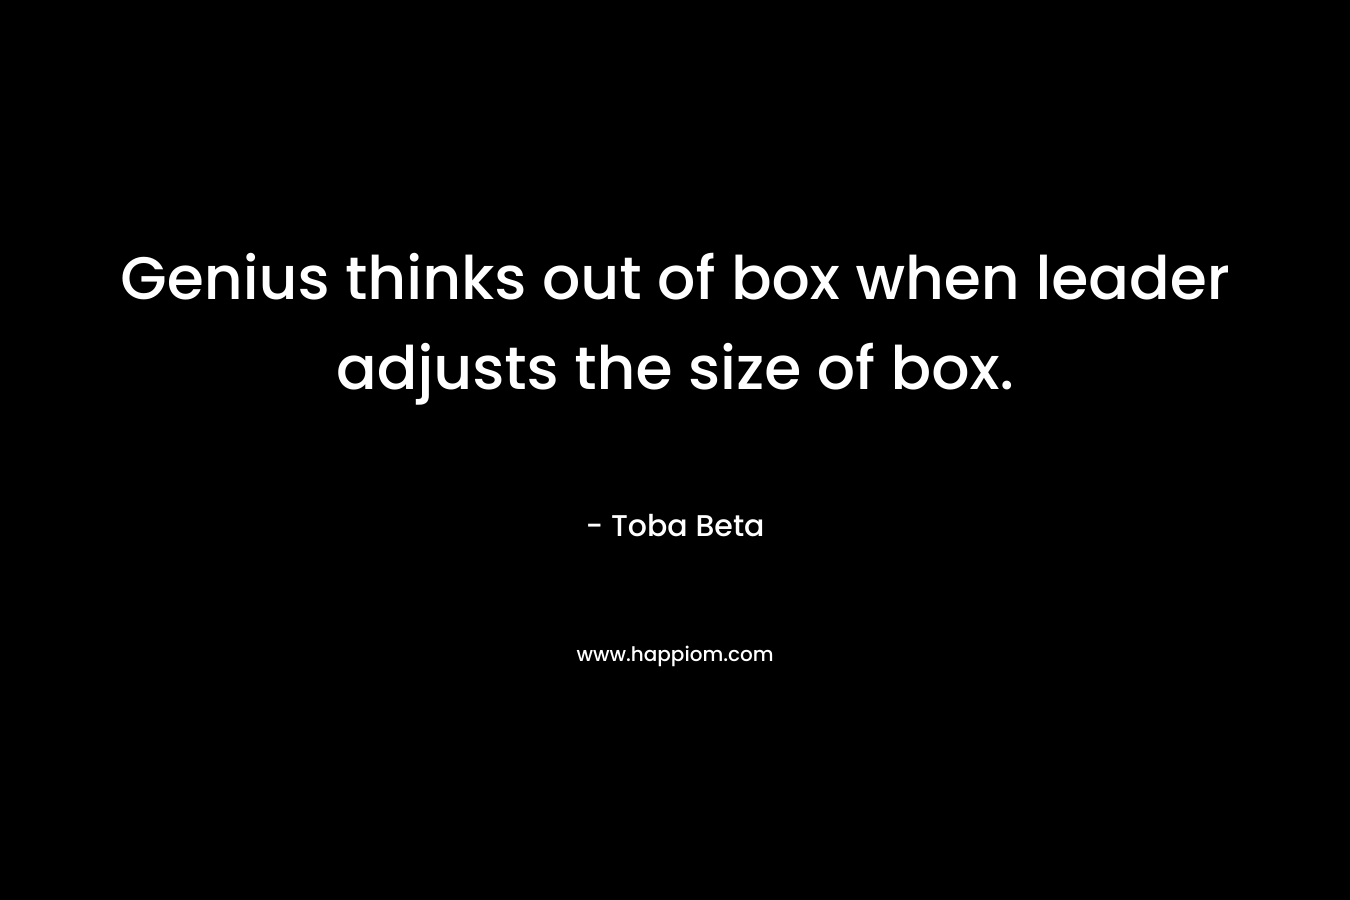 Genius thinks out of box when leader adjusts the size of box.